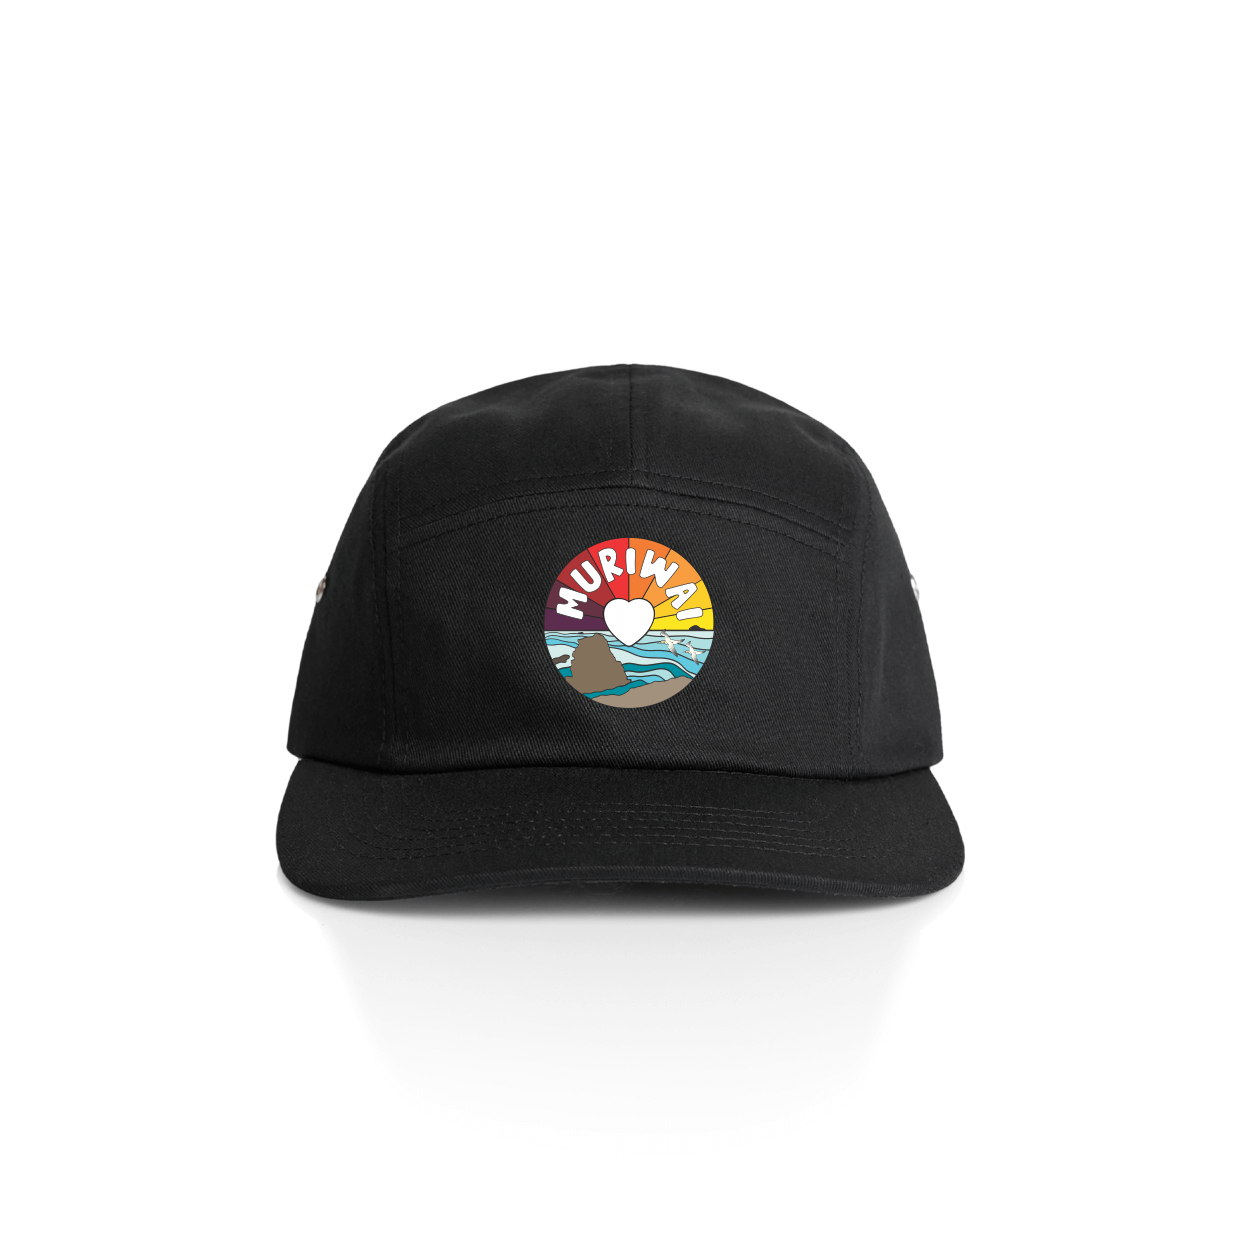 Muriwai “Waves of Resilience” Cap | Bowring Print & Merch